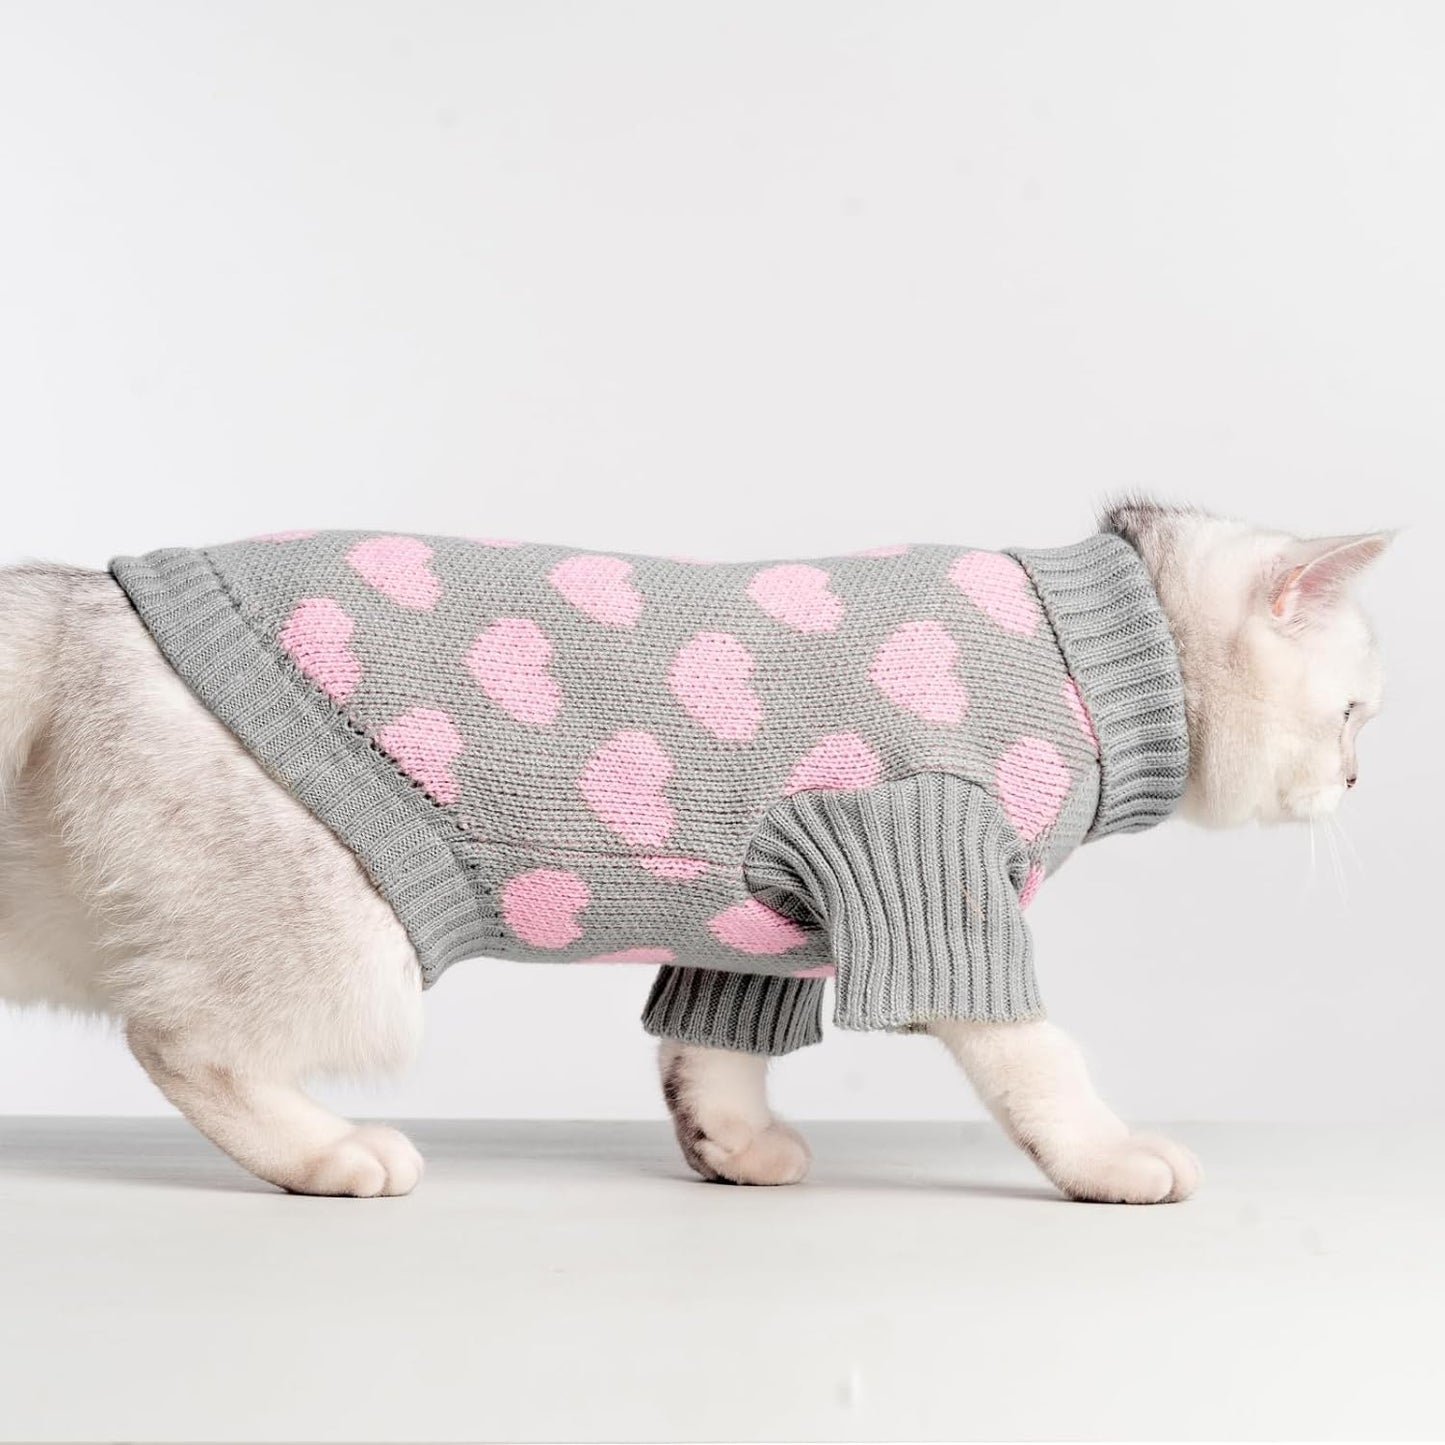  Valentine's Day Pet Sweater: Cozy Heart Pattern, Soft Knit, Warm Turtleneck for Small Cats and Kittens in Gray